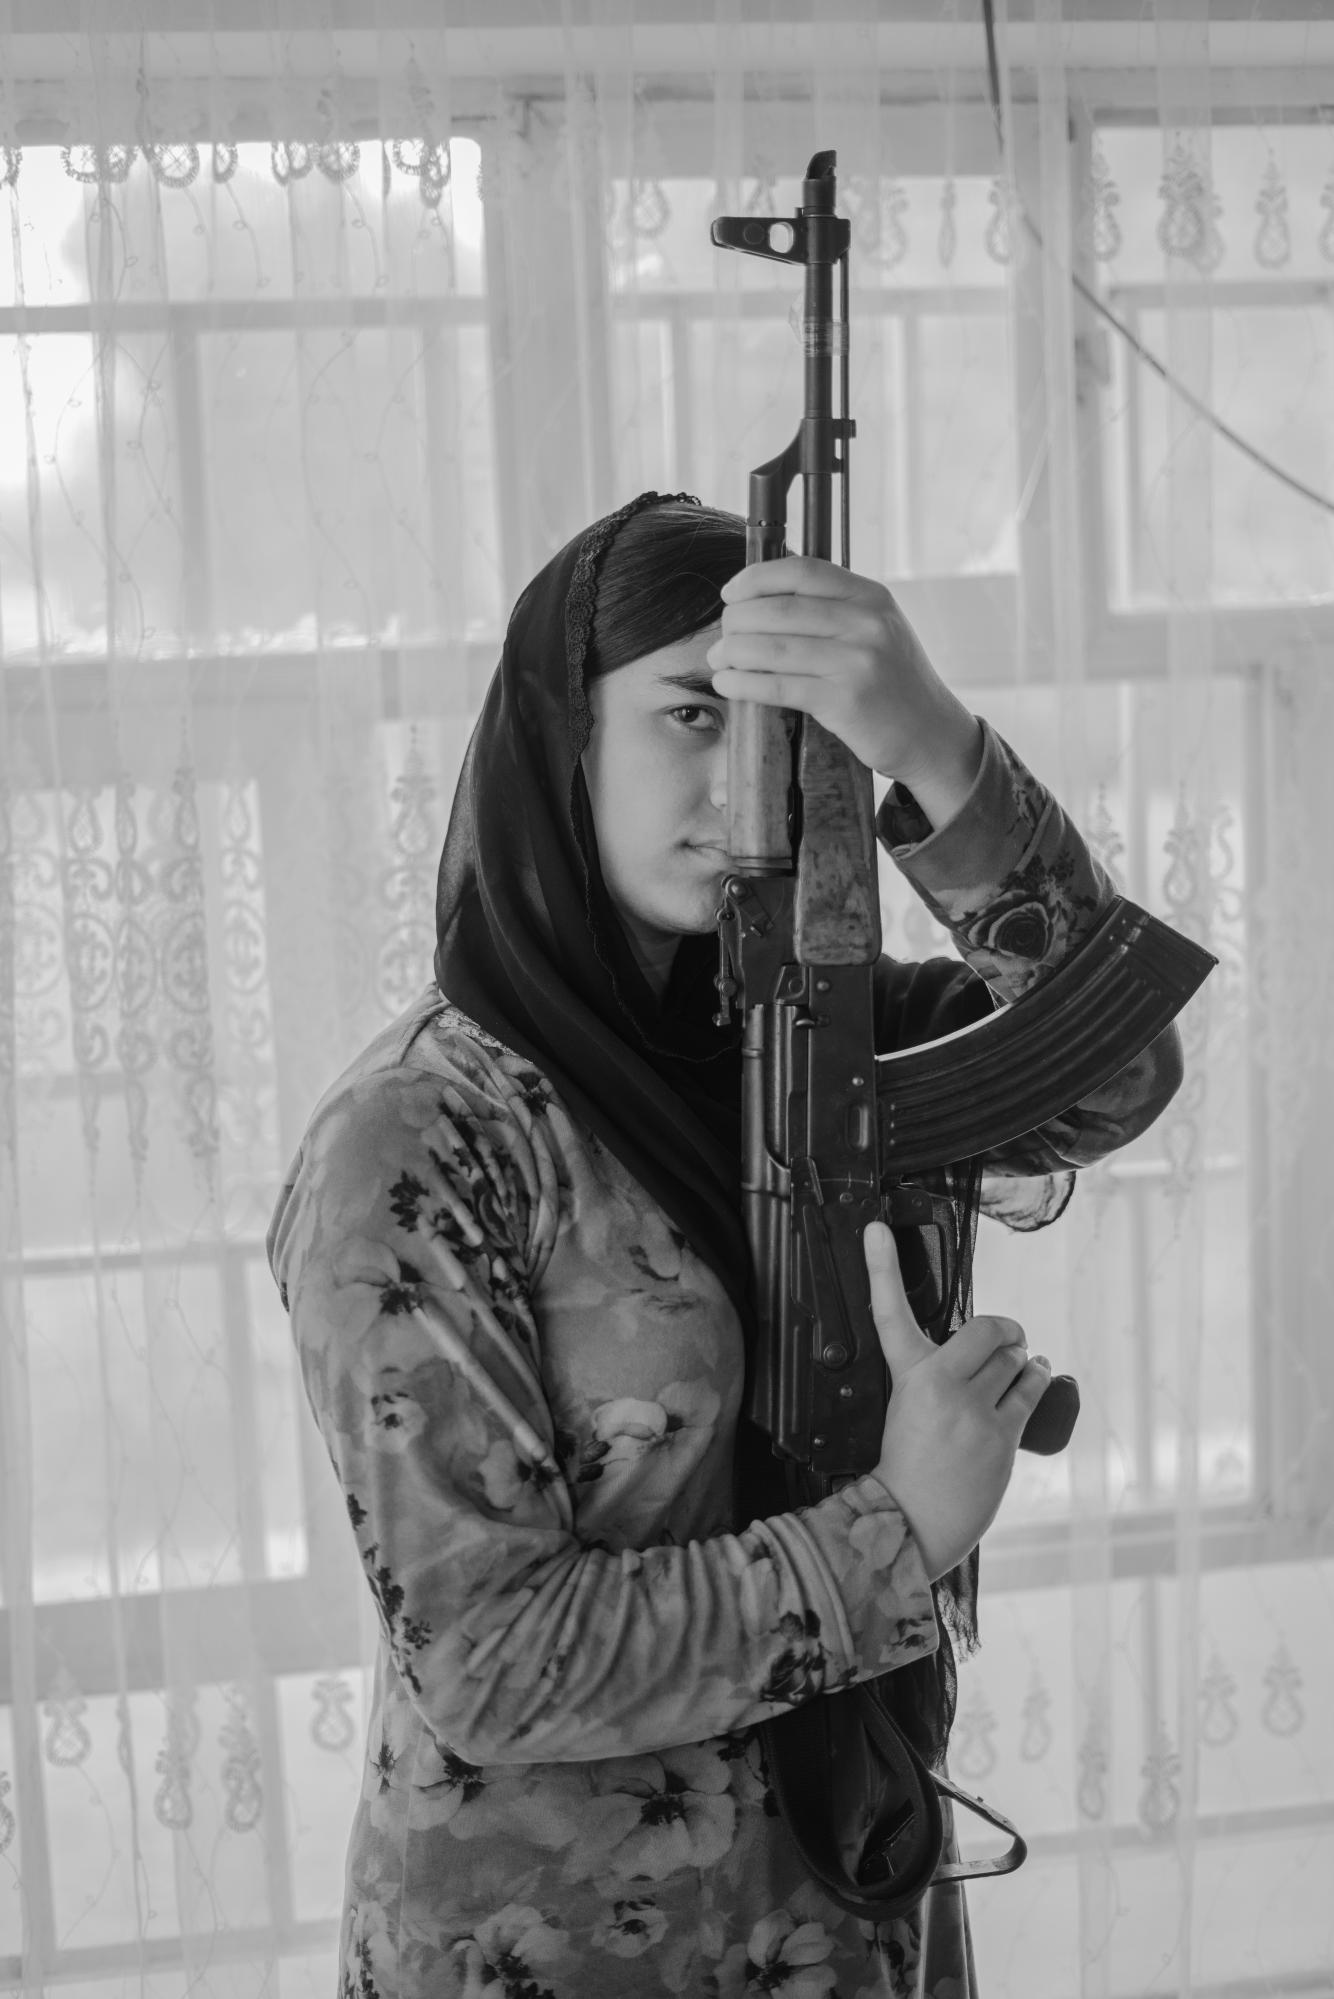 A Symbol of Kurdish women's courage and resistance